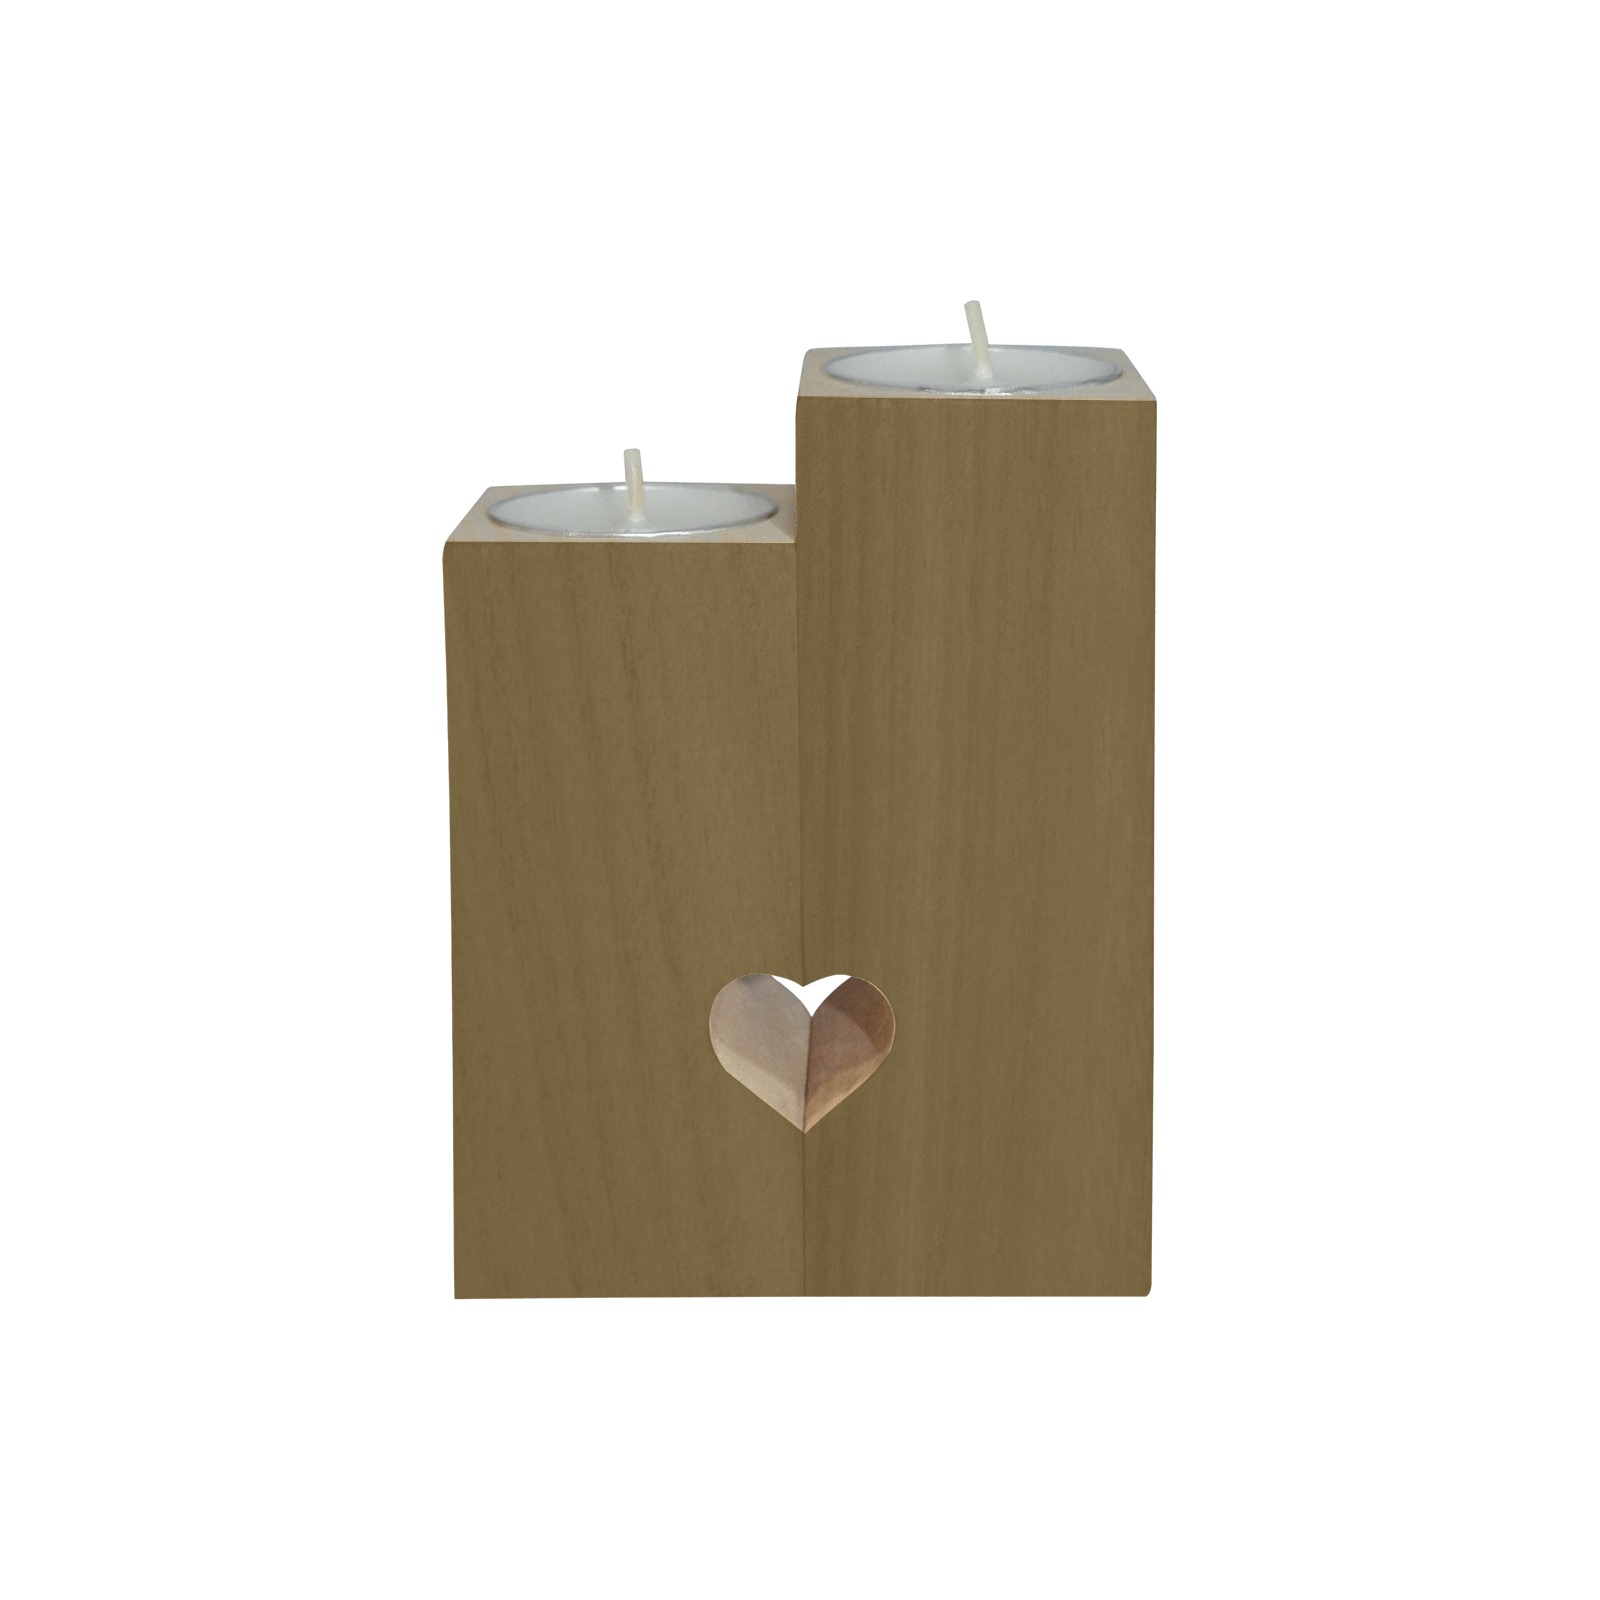 Changing Seasons Collection Wooden Candle Holder (Without Candle)